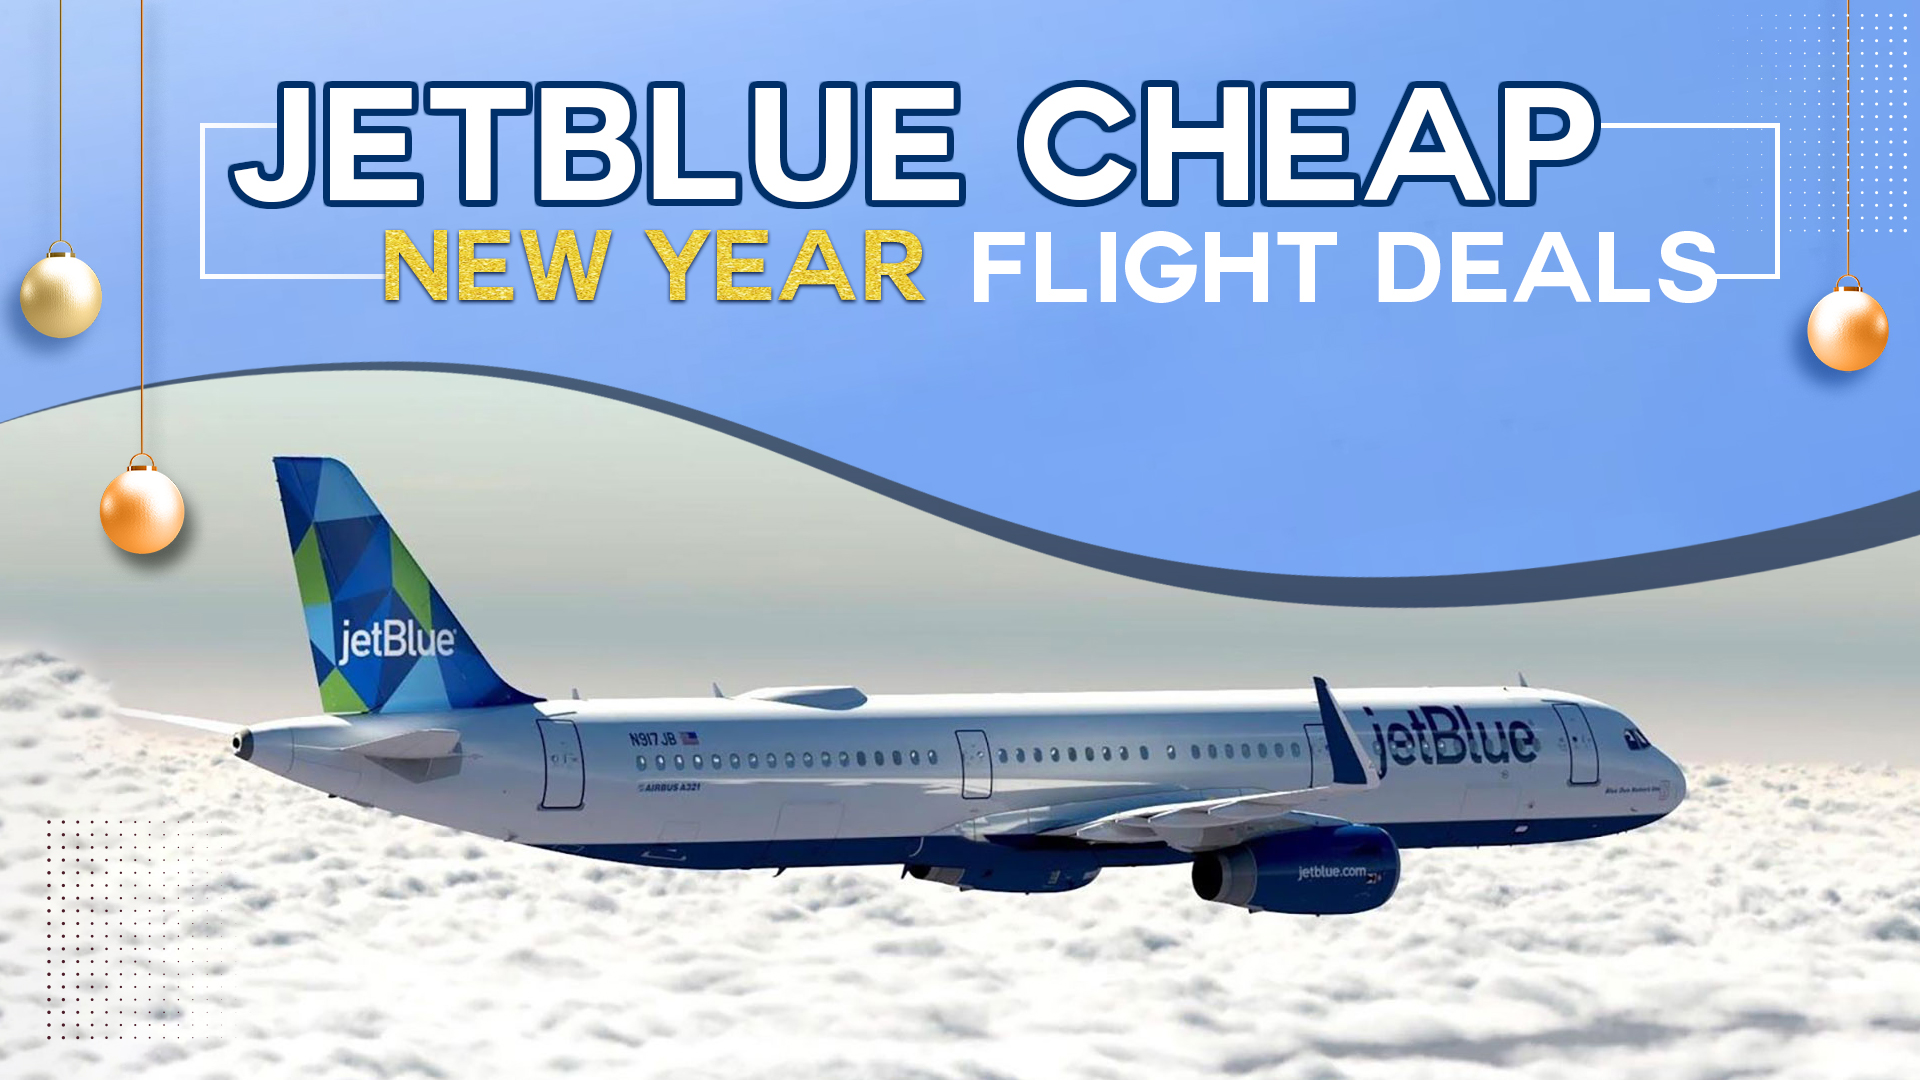 Take off to 2024 with JetBlue’s Cheap New Year Flight Deals!